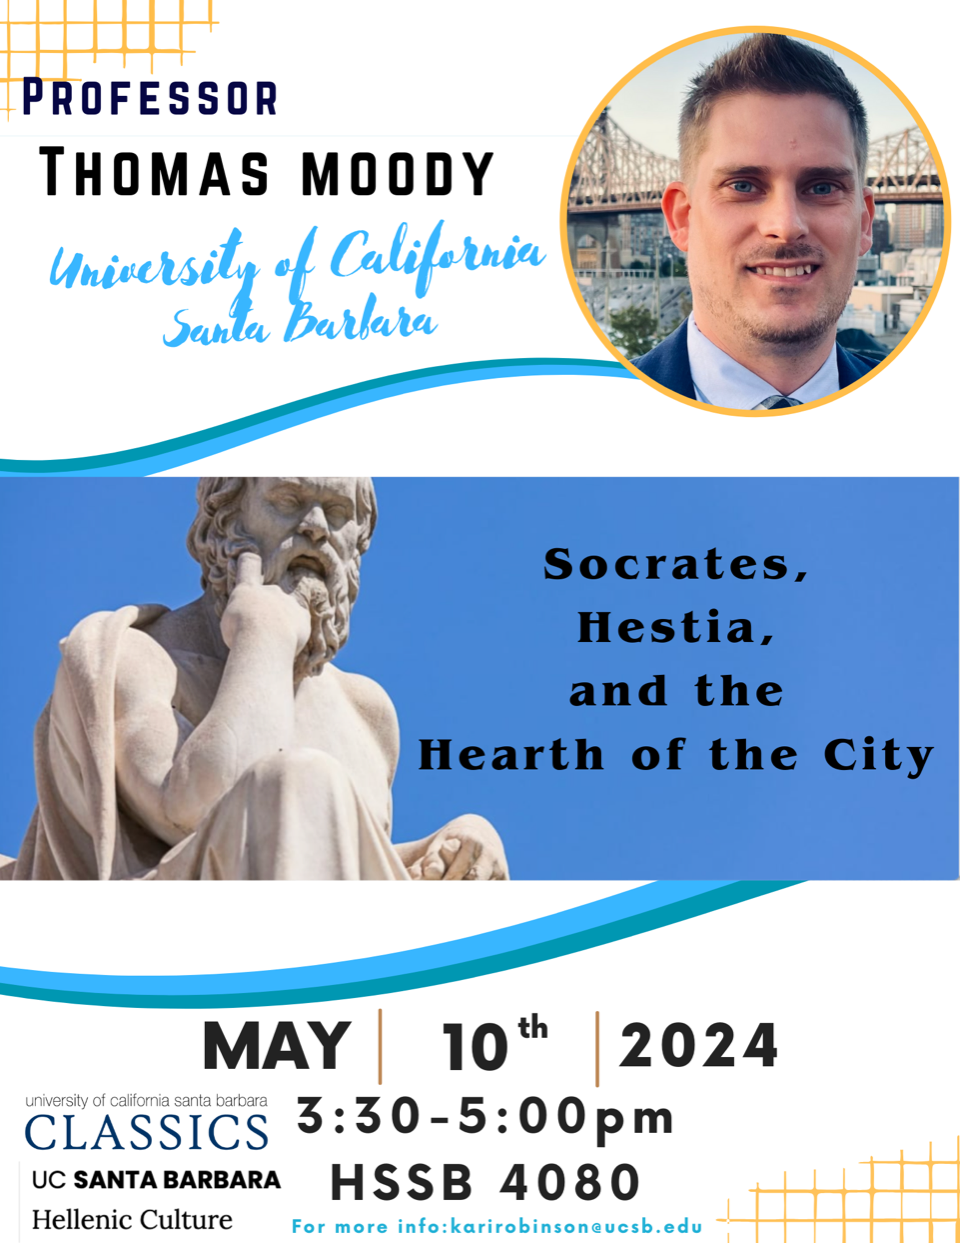 Thomas Moody (UCSB), “Socrates, Hestia, and the Hearth of the City” @ HSSB 4080